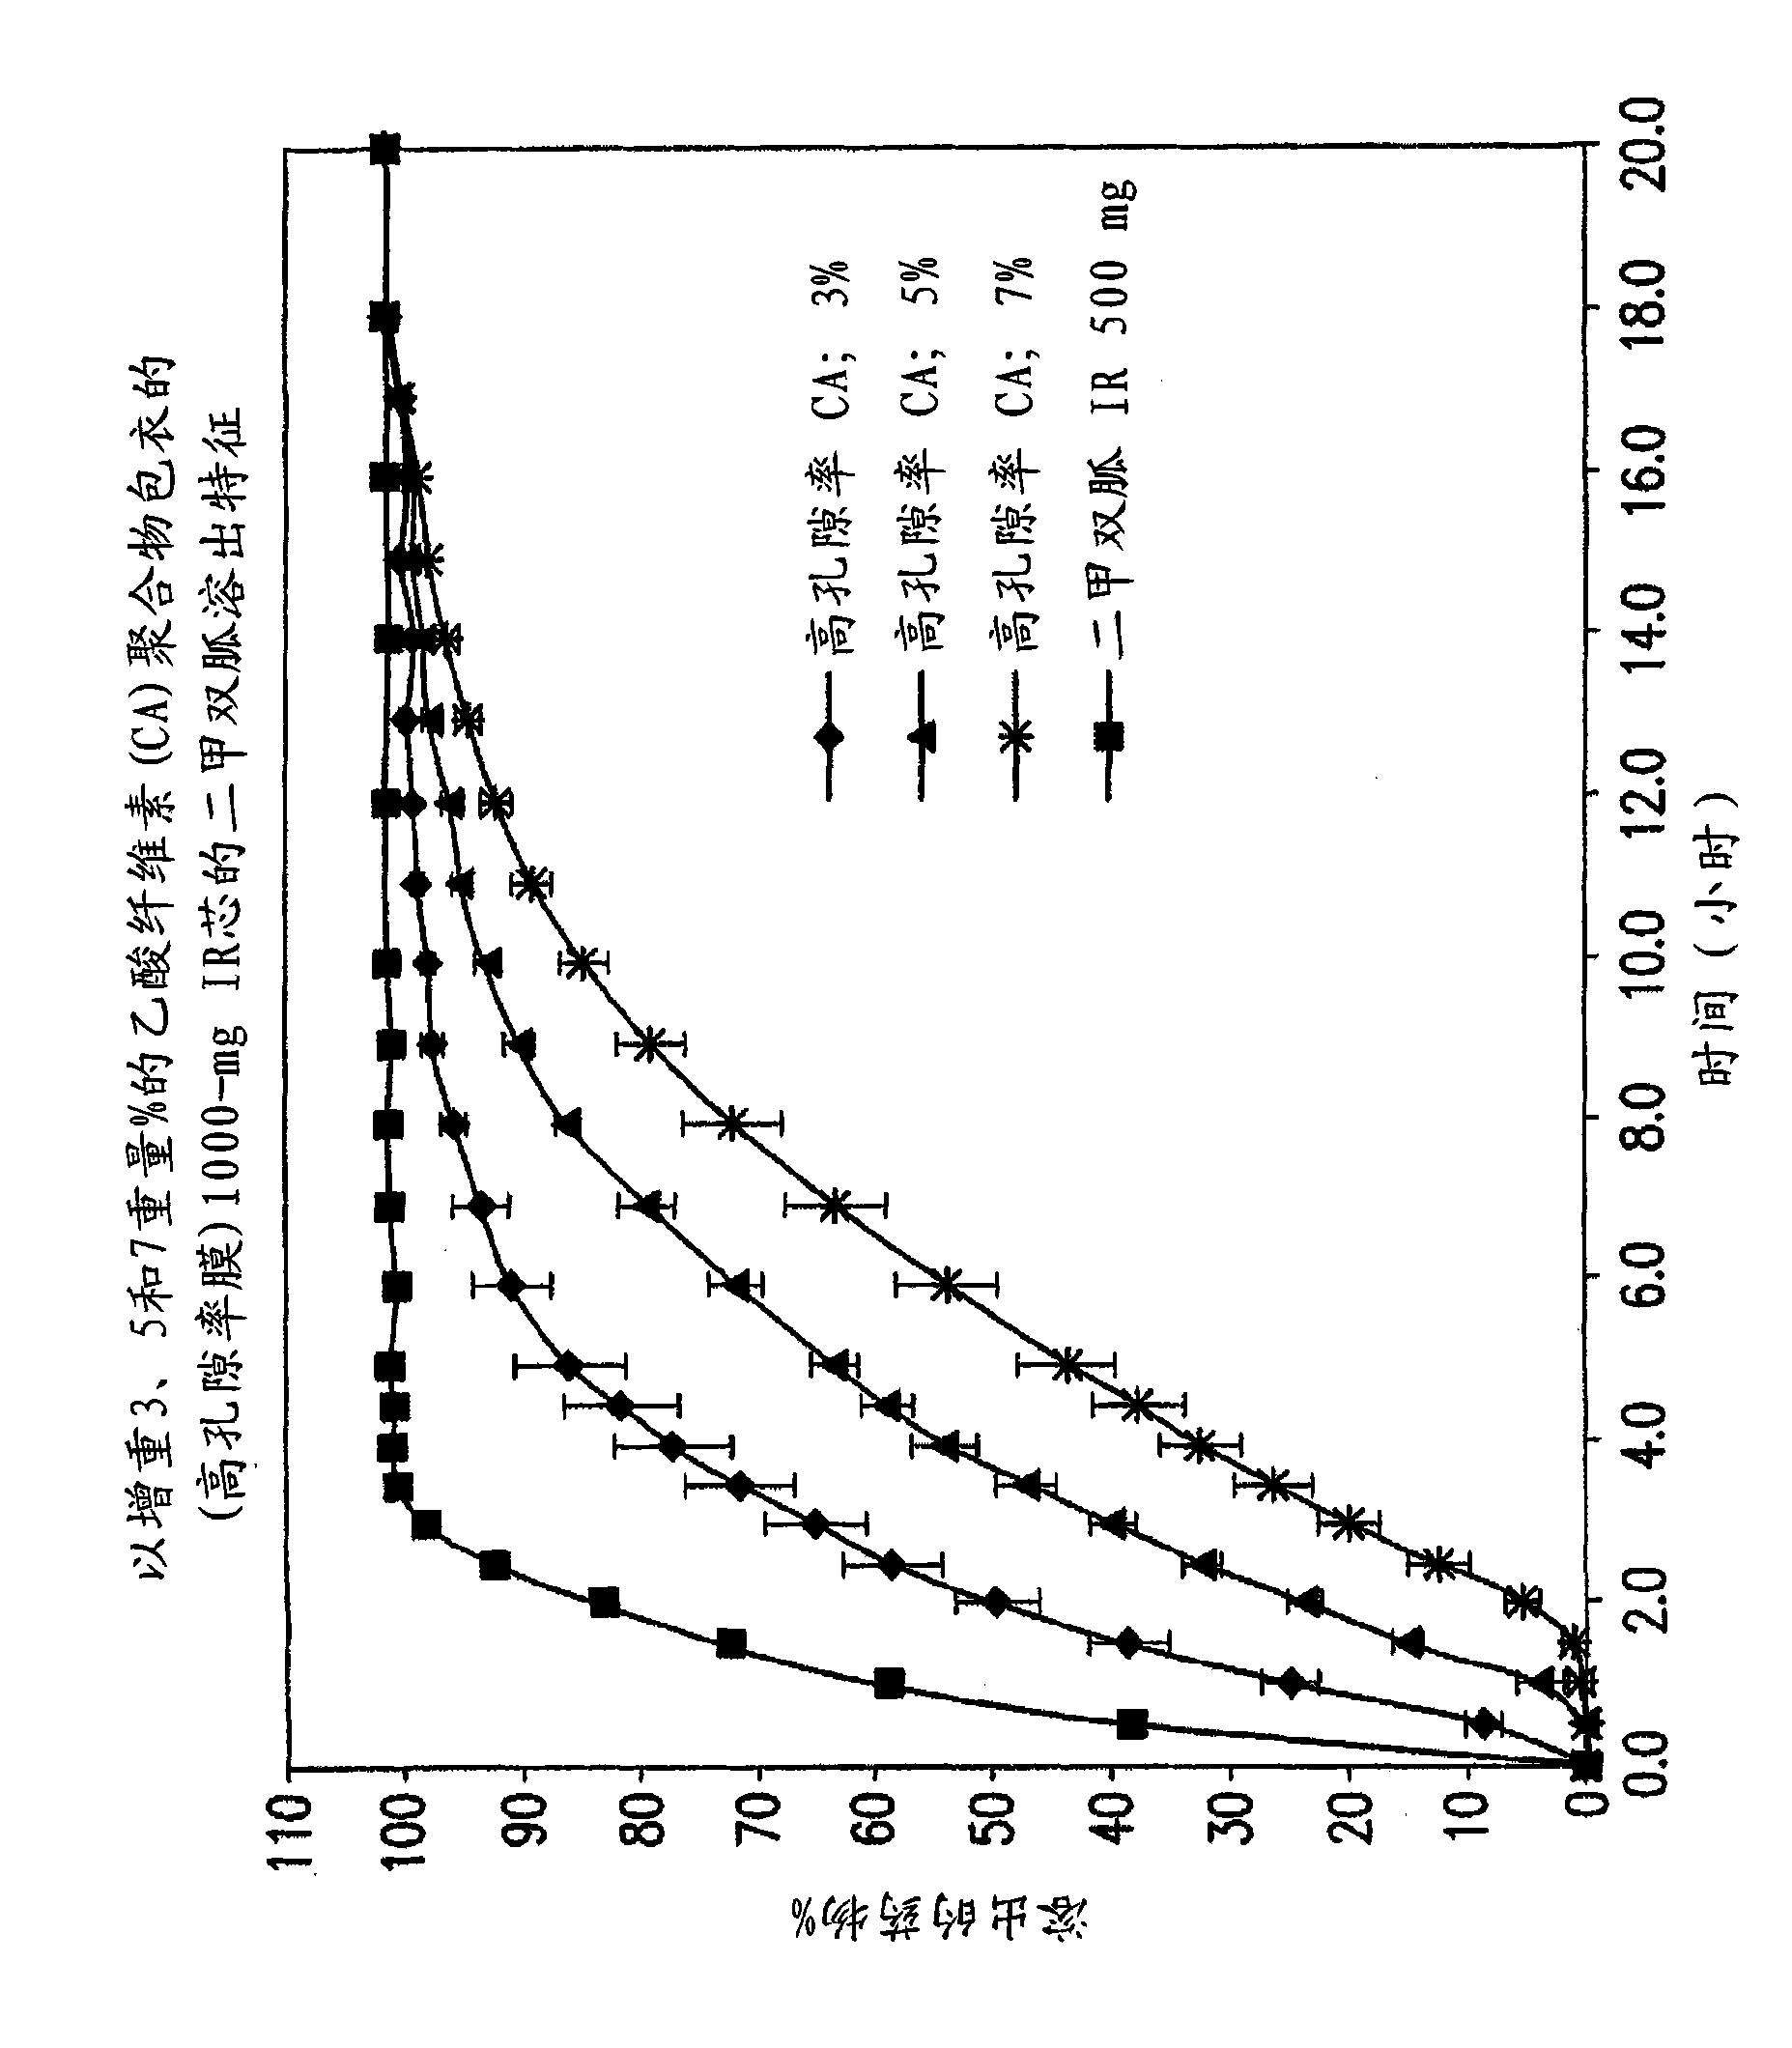 Pharmaceutical compositions of a combination of metformin and a dipeptidyl peptidase-IV inhibitor